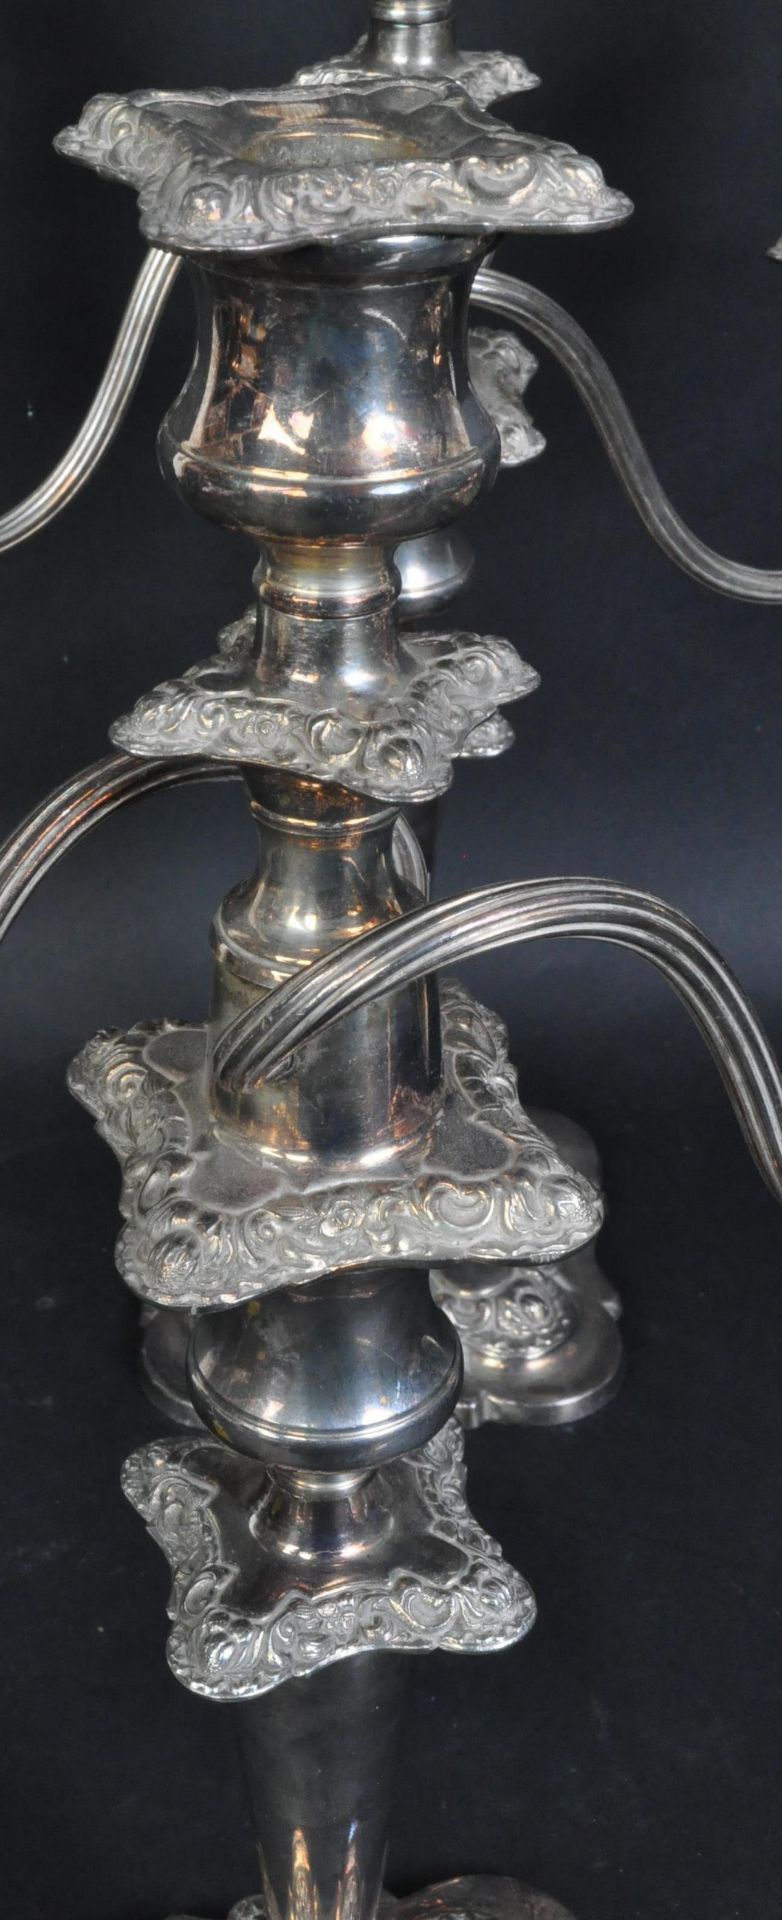 PAIR OF VINTAGE SILVER PLATED CANDLESTICK CANDELABRAS - Image 4 of 5